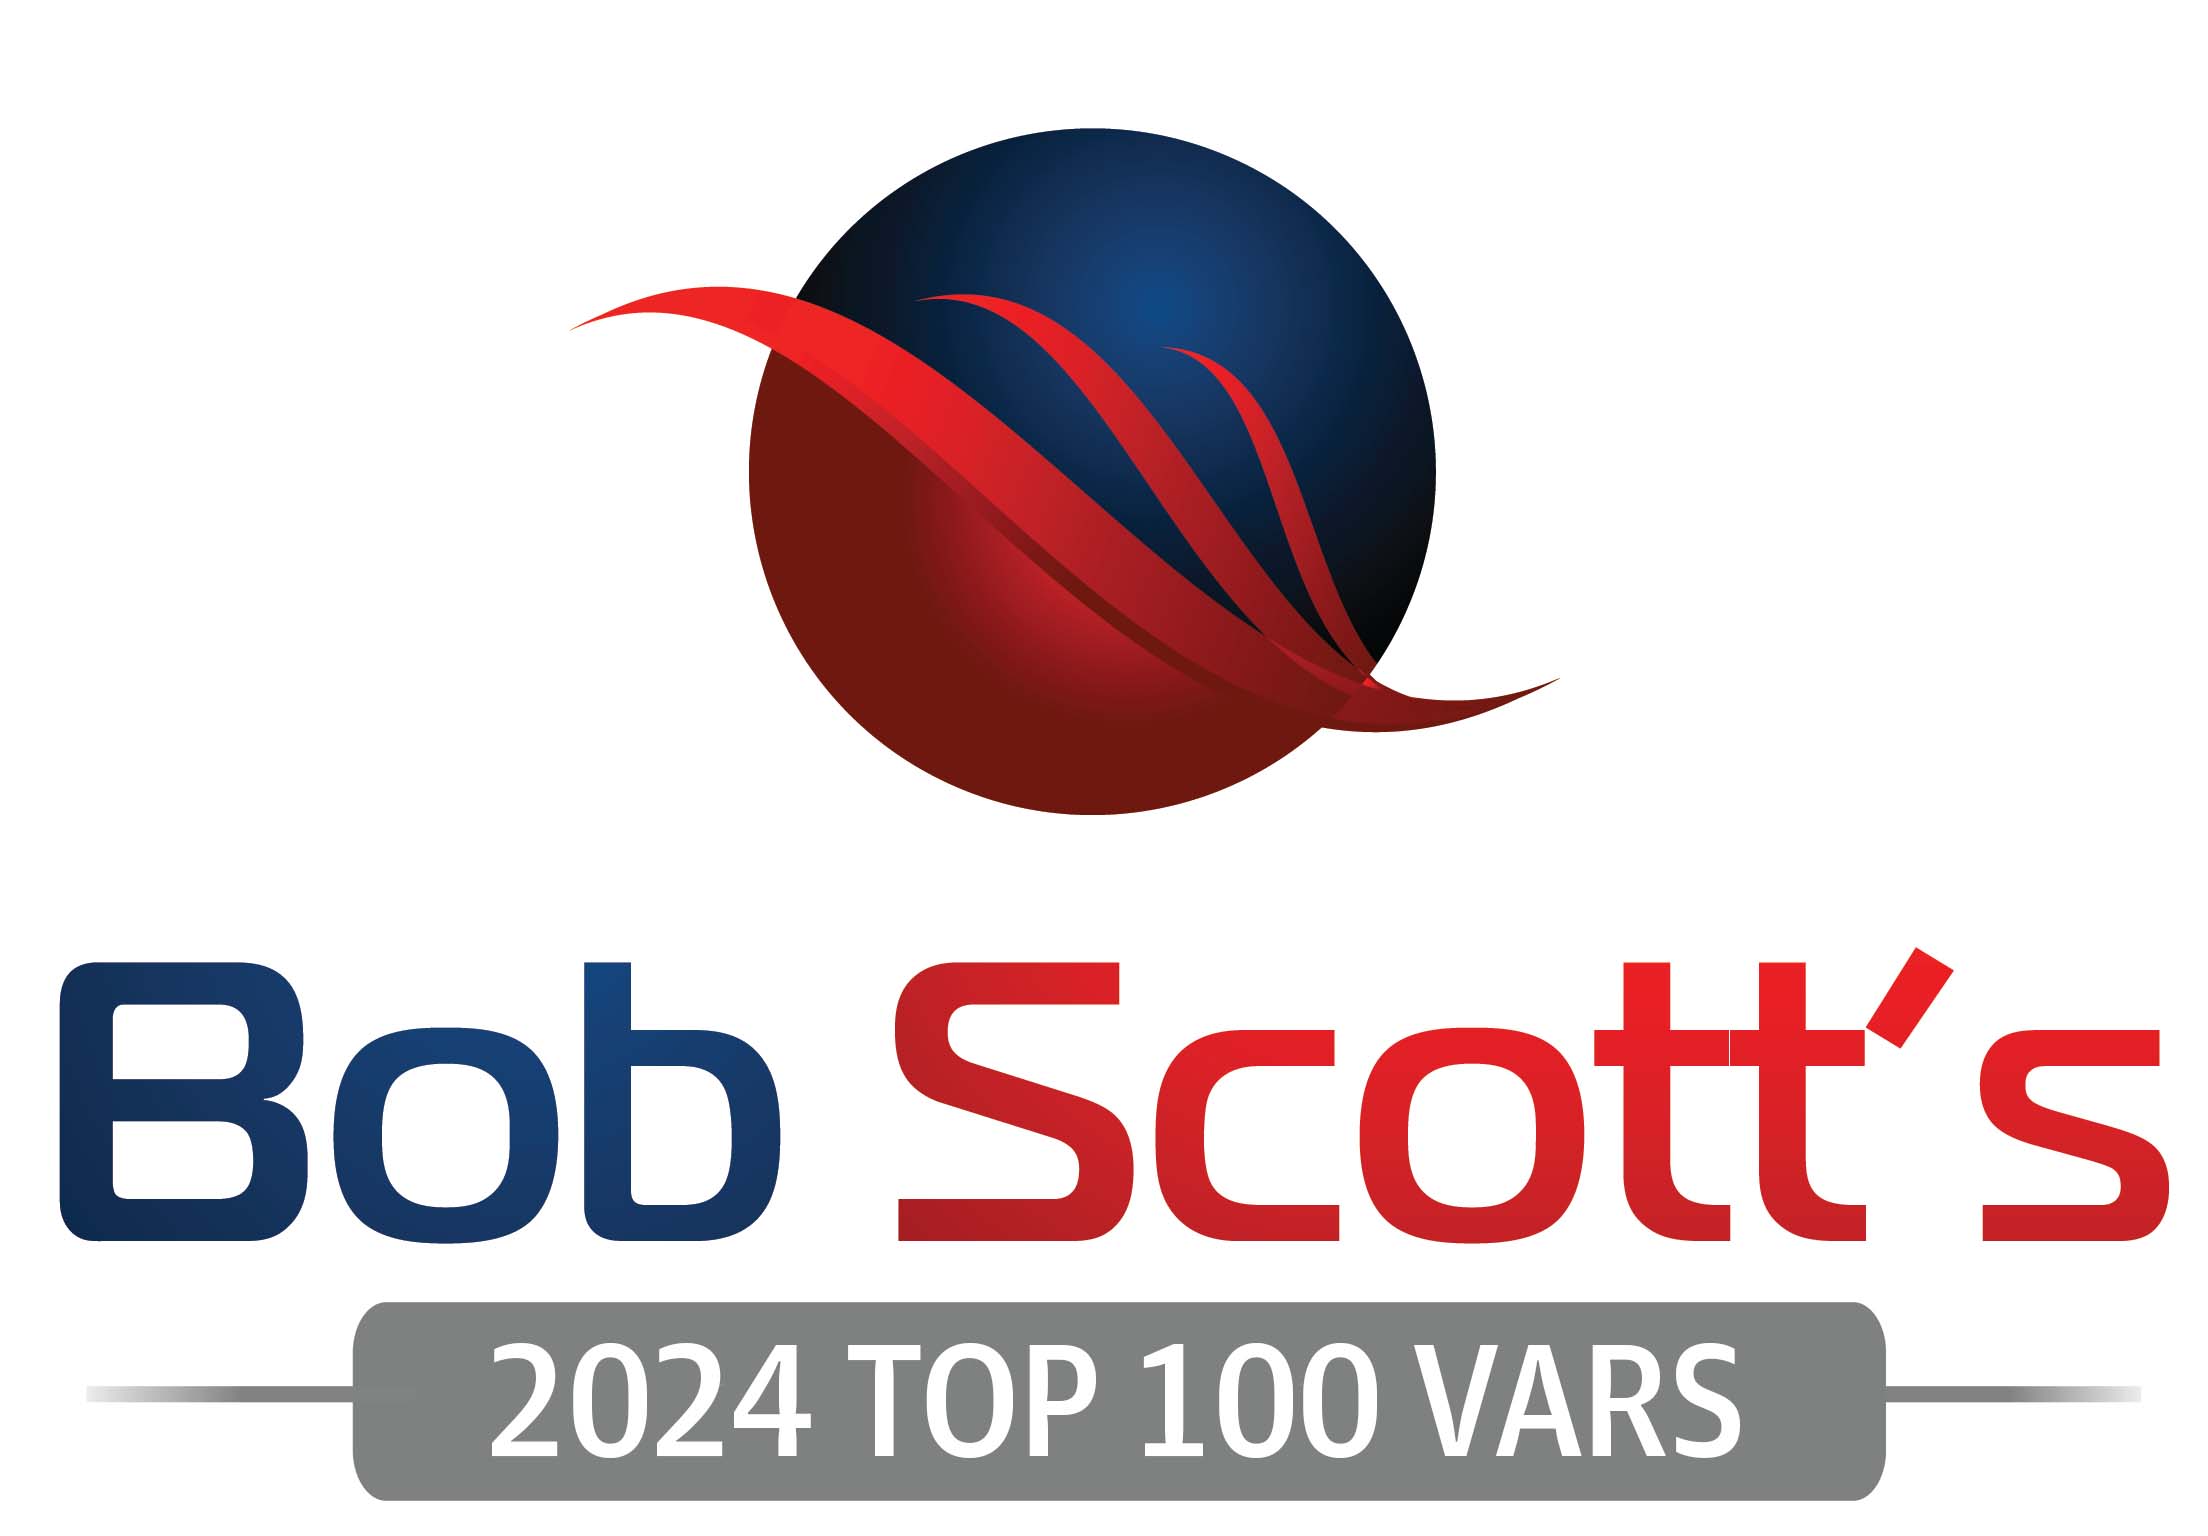 Red and blue circular logo for Bob Scott's 2024 Top 100 VARs with text below